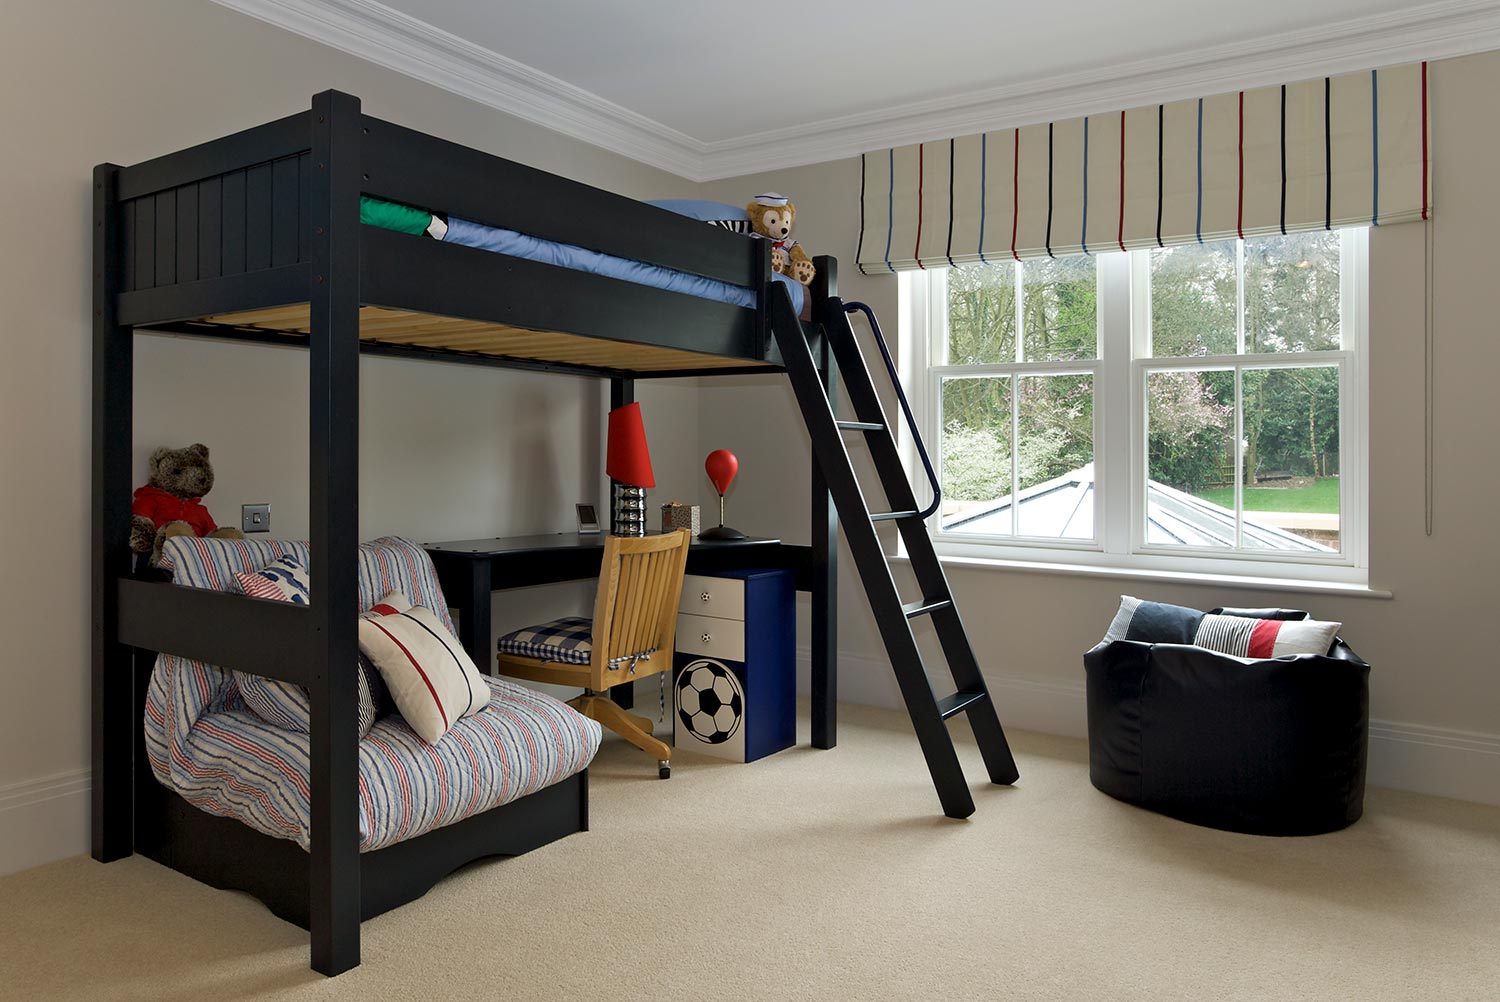 Large wooden framed bunk bed is located in the corner of the room adjacent to a large window overlooking the garden